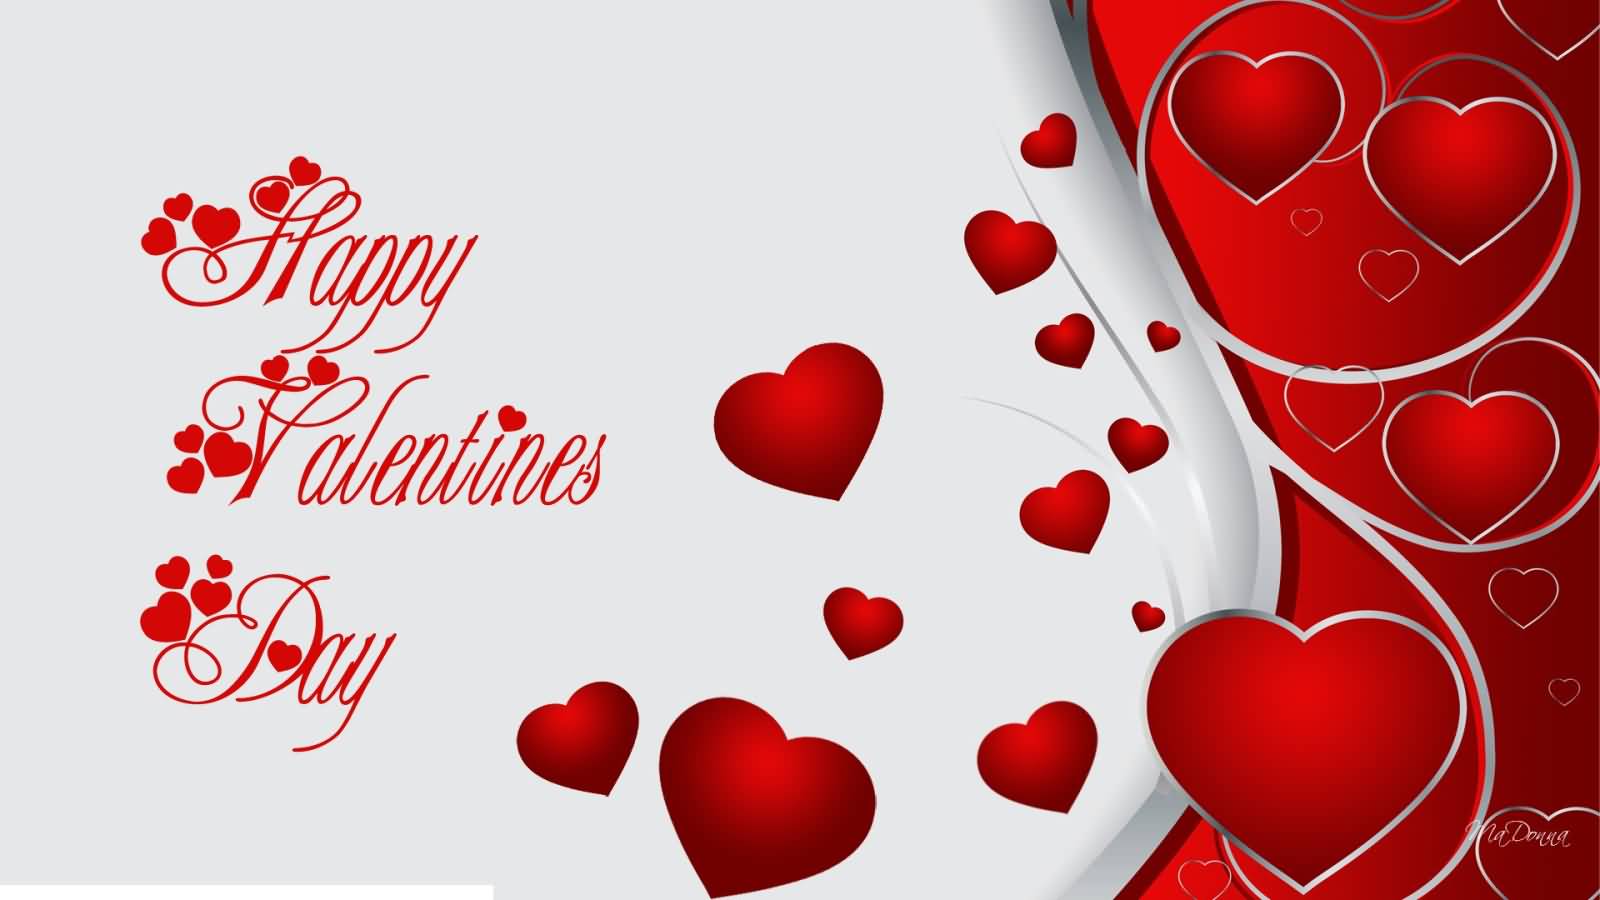 Happy Valentine's Day Red Hearts Wallpaper